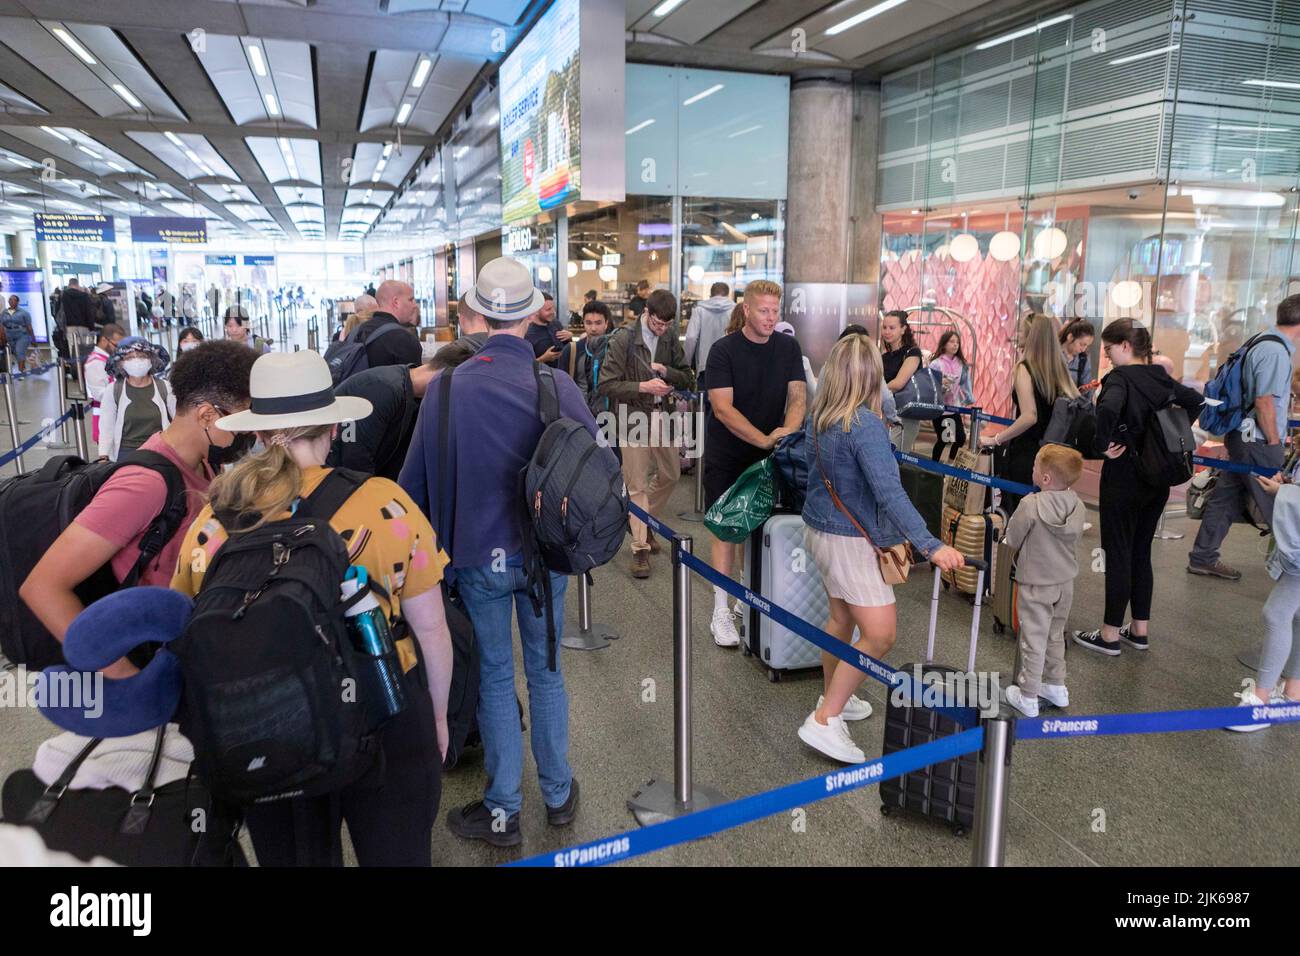 Eurostar travellers form long queues that go all the way up the departure hall at London King’s Cross St. Pancras this morning.   Image shot on 29th J Stock Photo